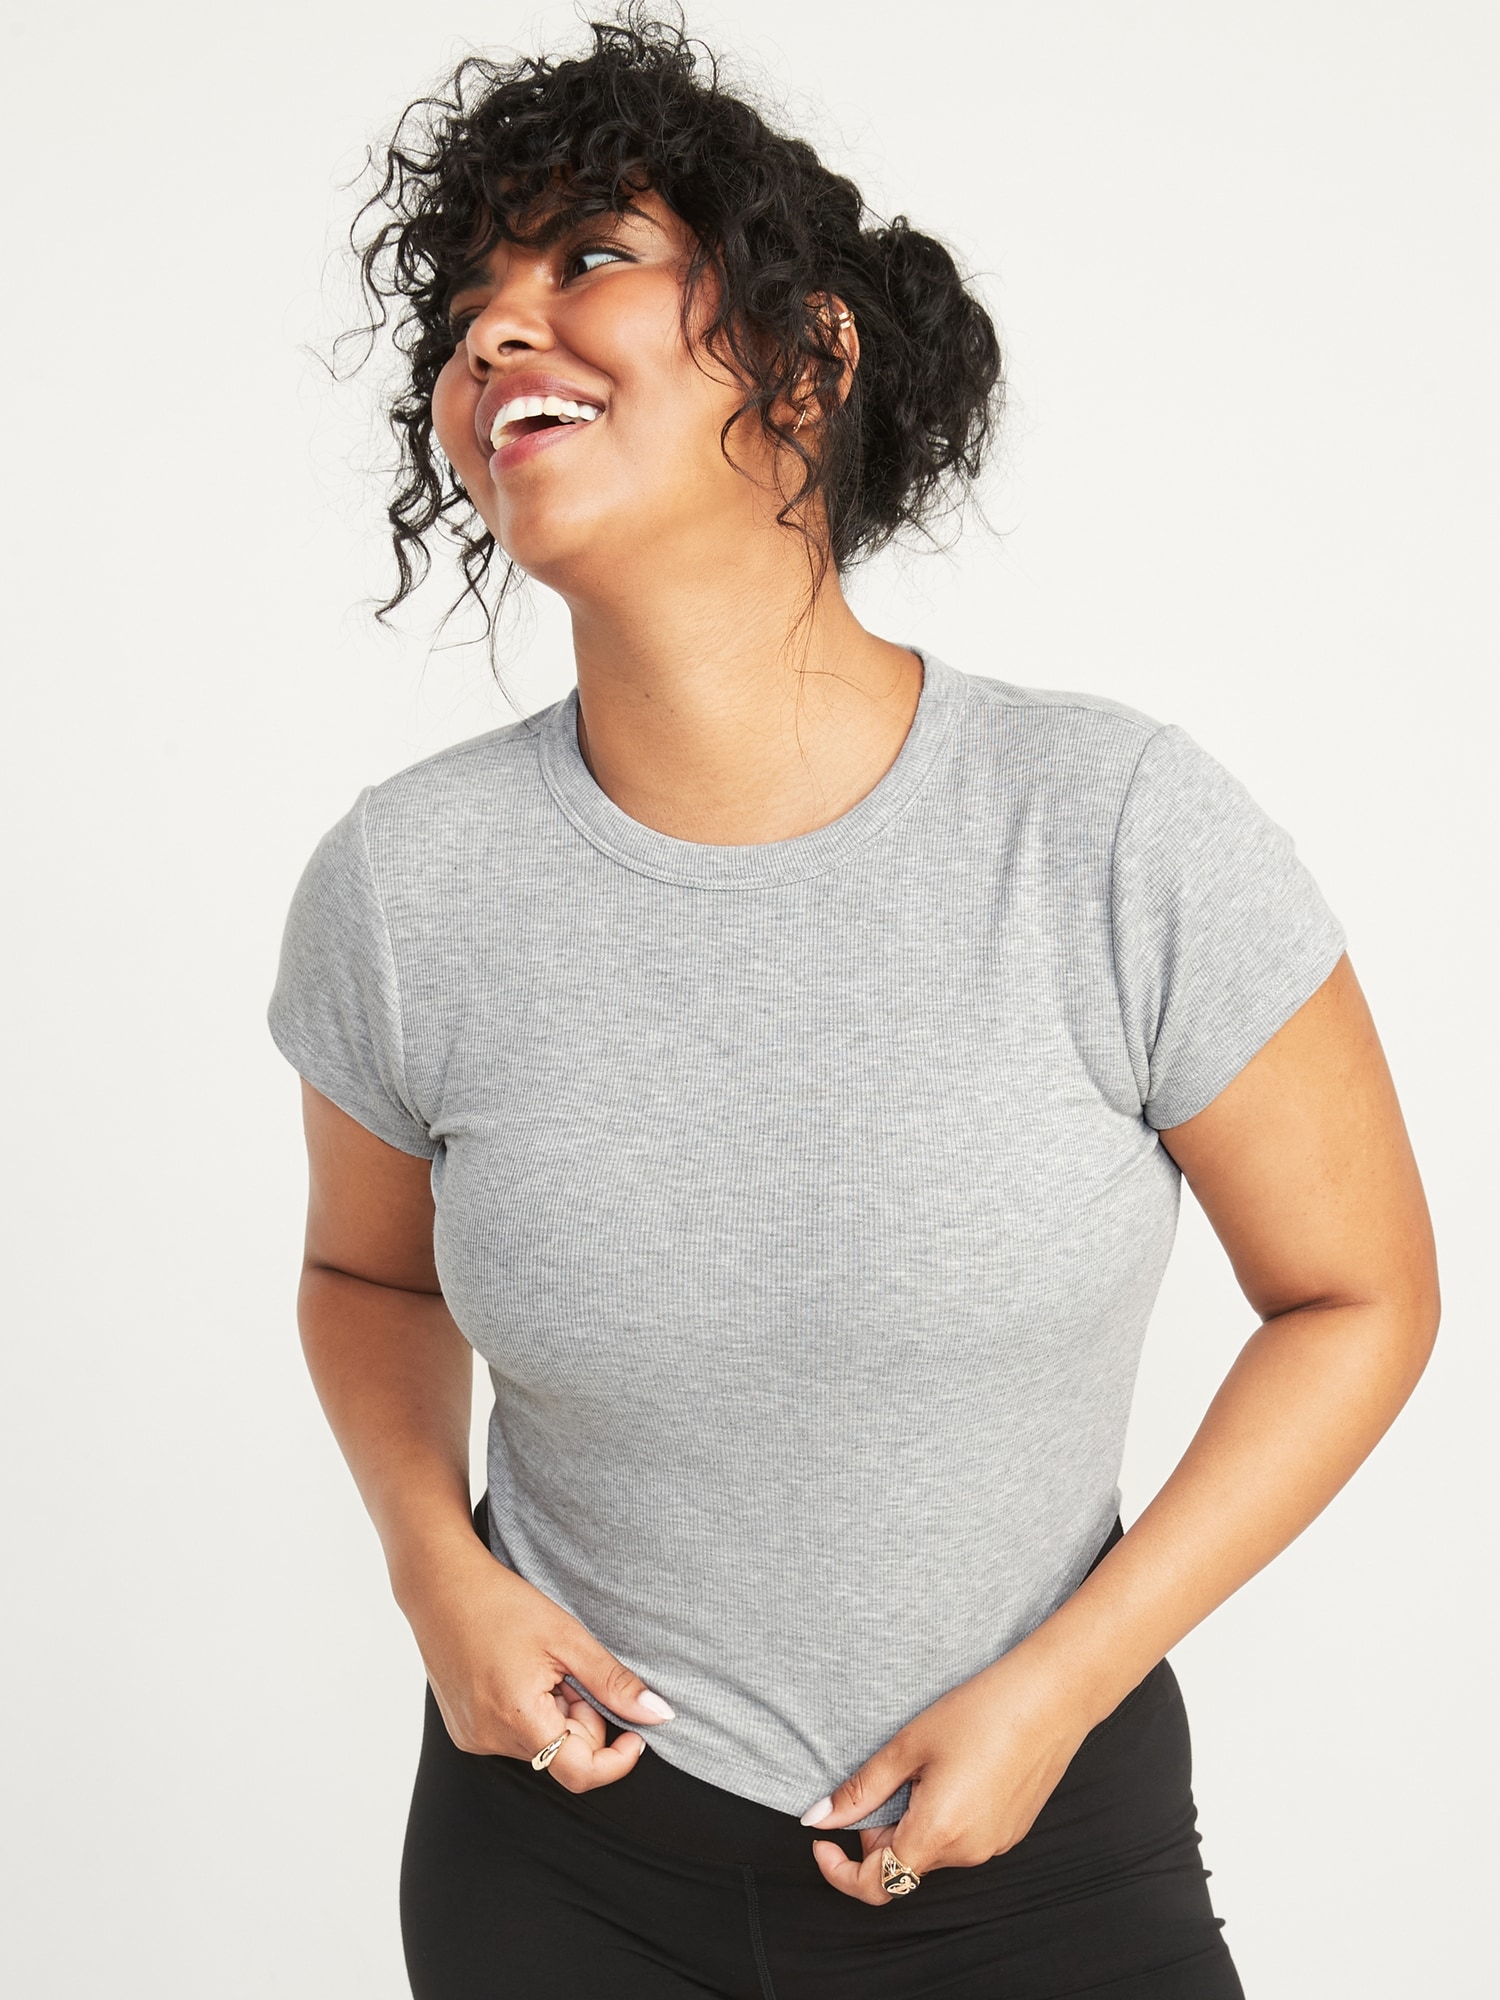 Short-Sleeve UltraLite Cropped Rib-Knit T-Shirt 3-Pack for Women | Old Navy